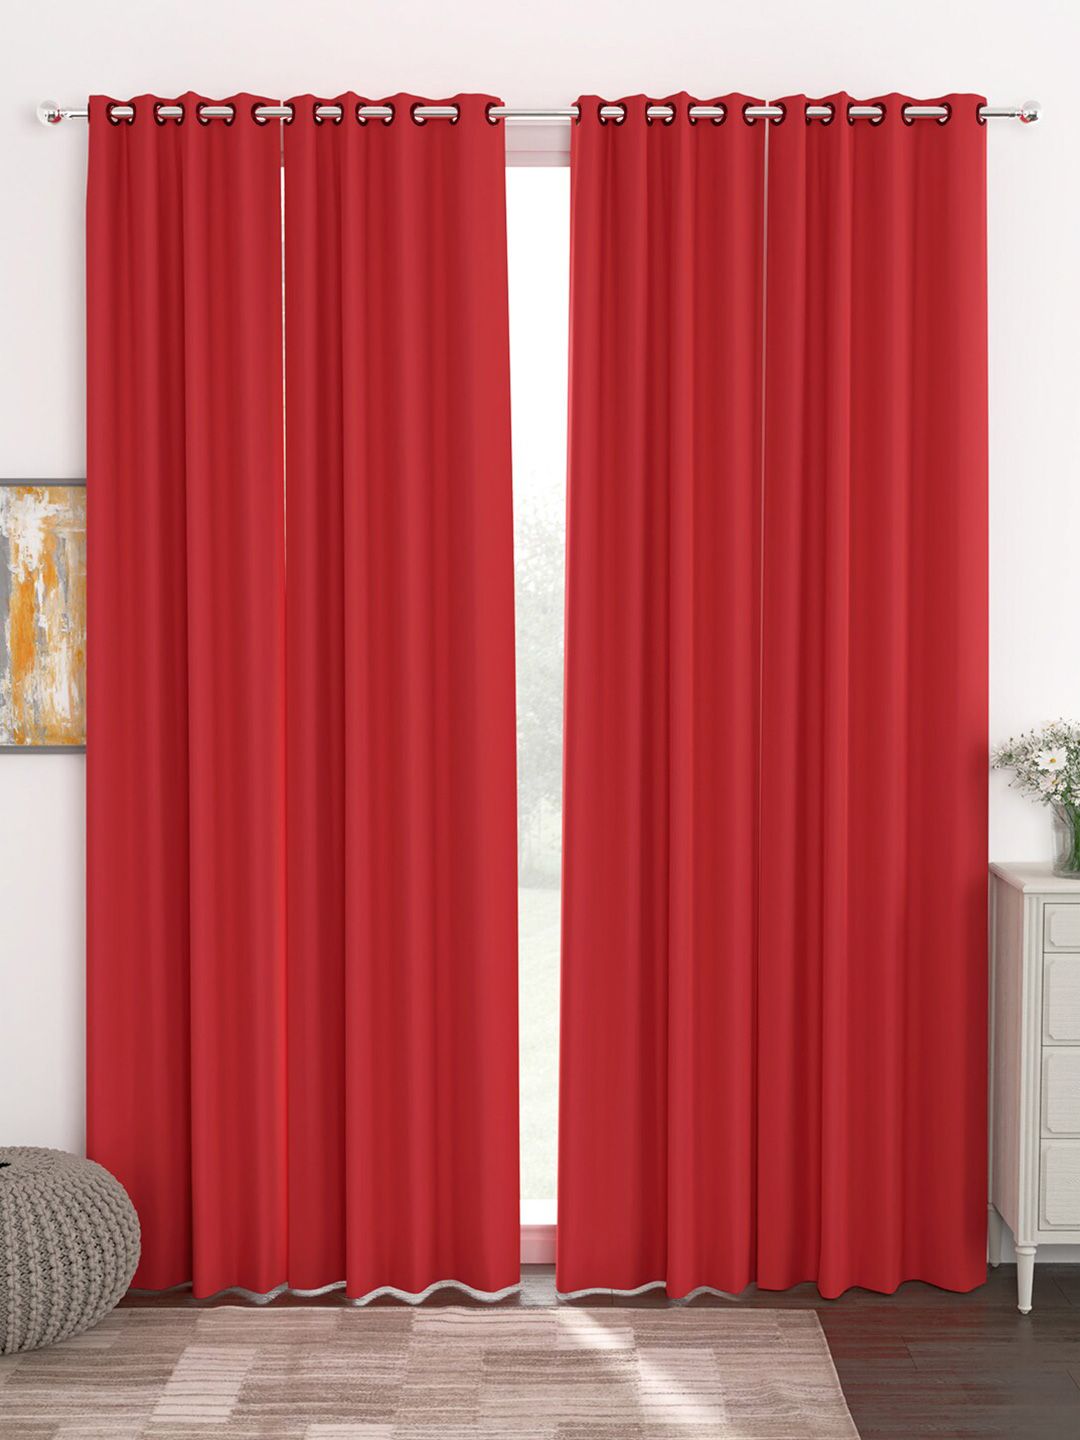 Story@home Red Set of 4 Black Out Door Curtain Price in India